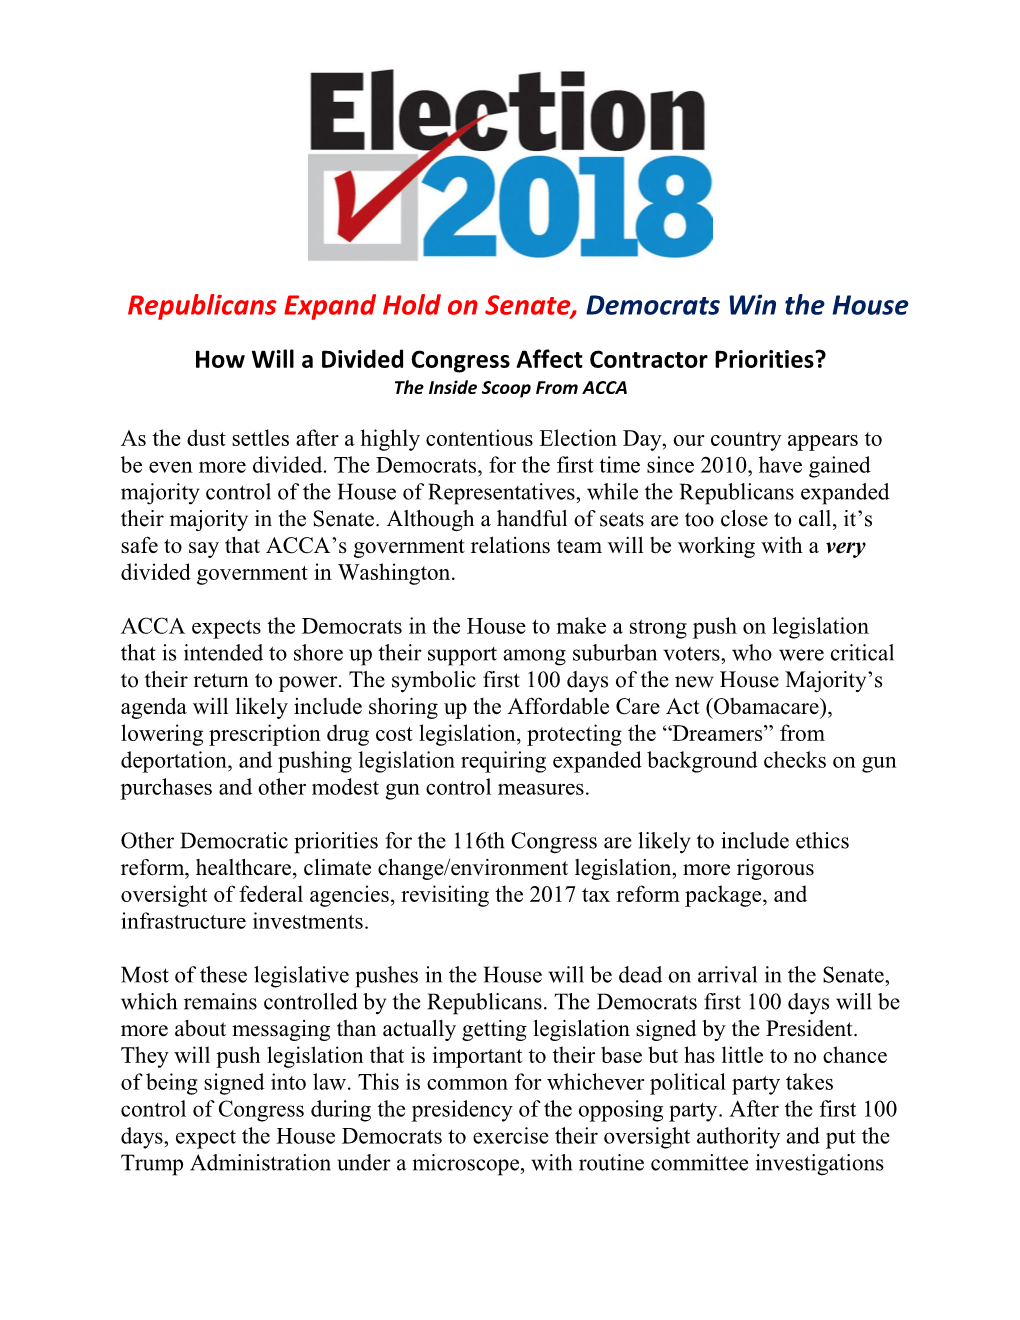 Republicans Expand Hold on Senate, Democrats Win the House How Will a Divided Congress Affect Contractor Priorities? the Inside Scoop from ACCA